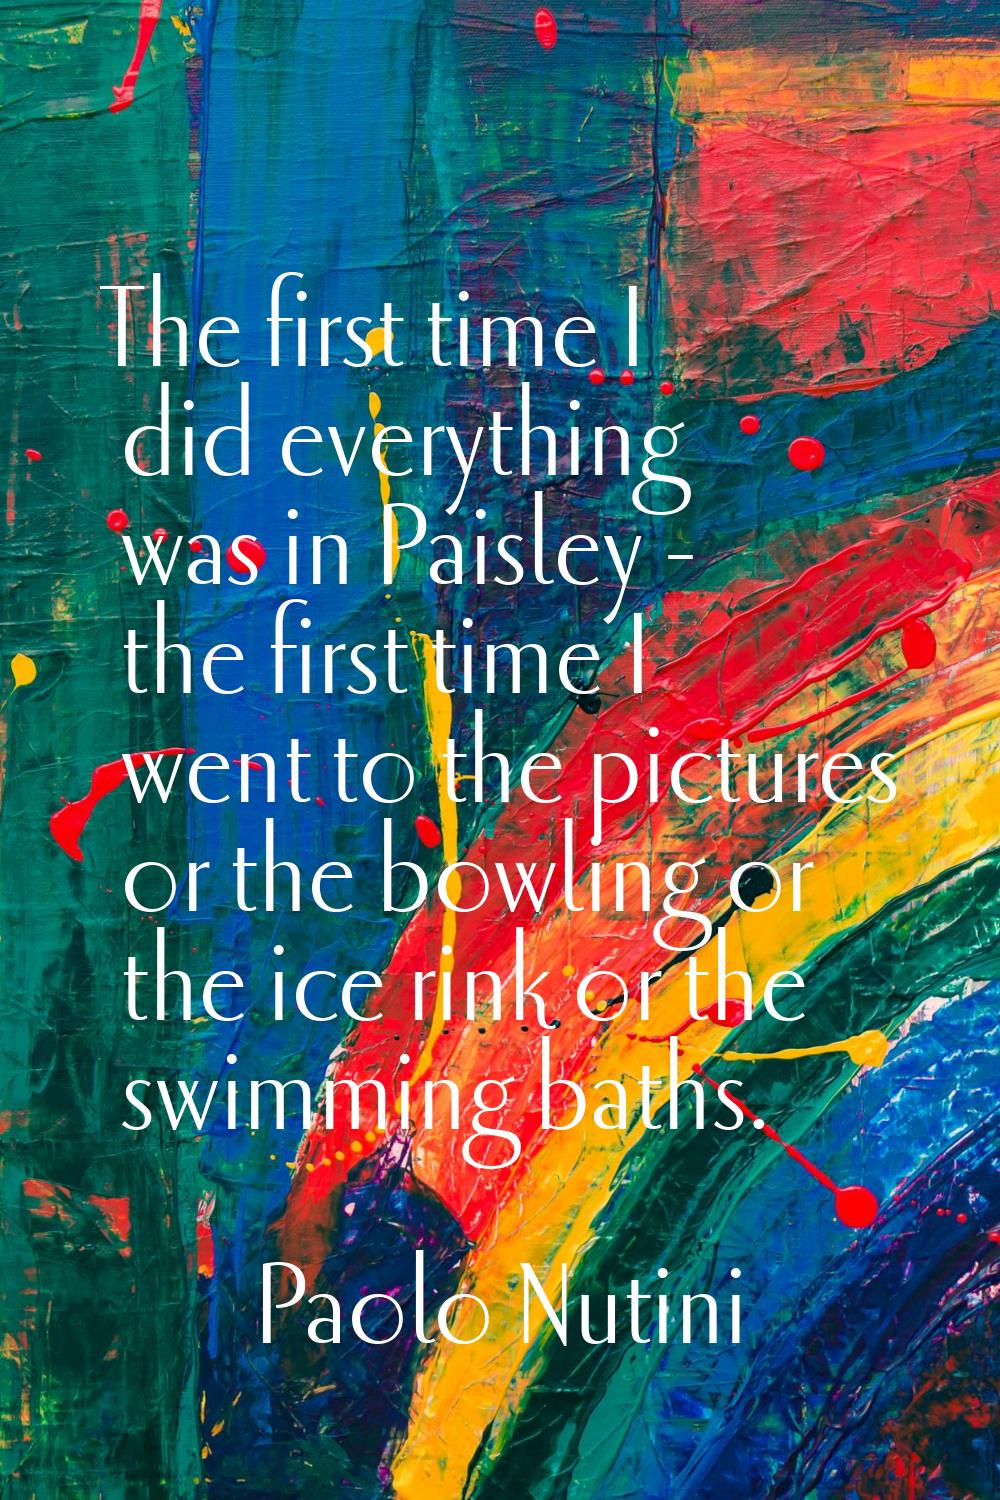 The first time I did everything was in Paisley - the first time I went to the pictures or the bowli